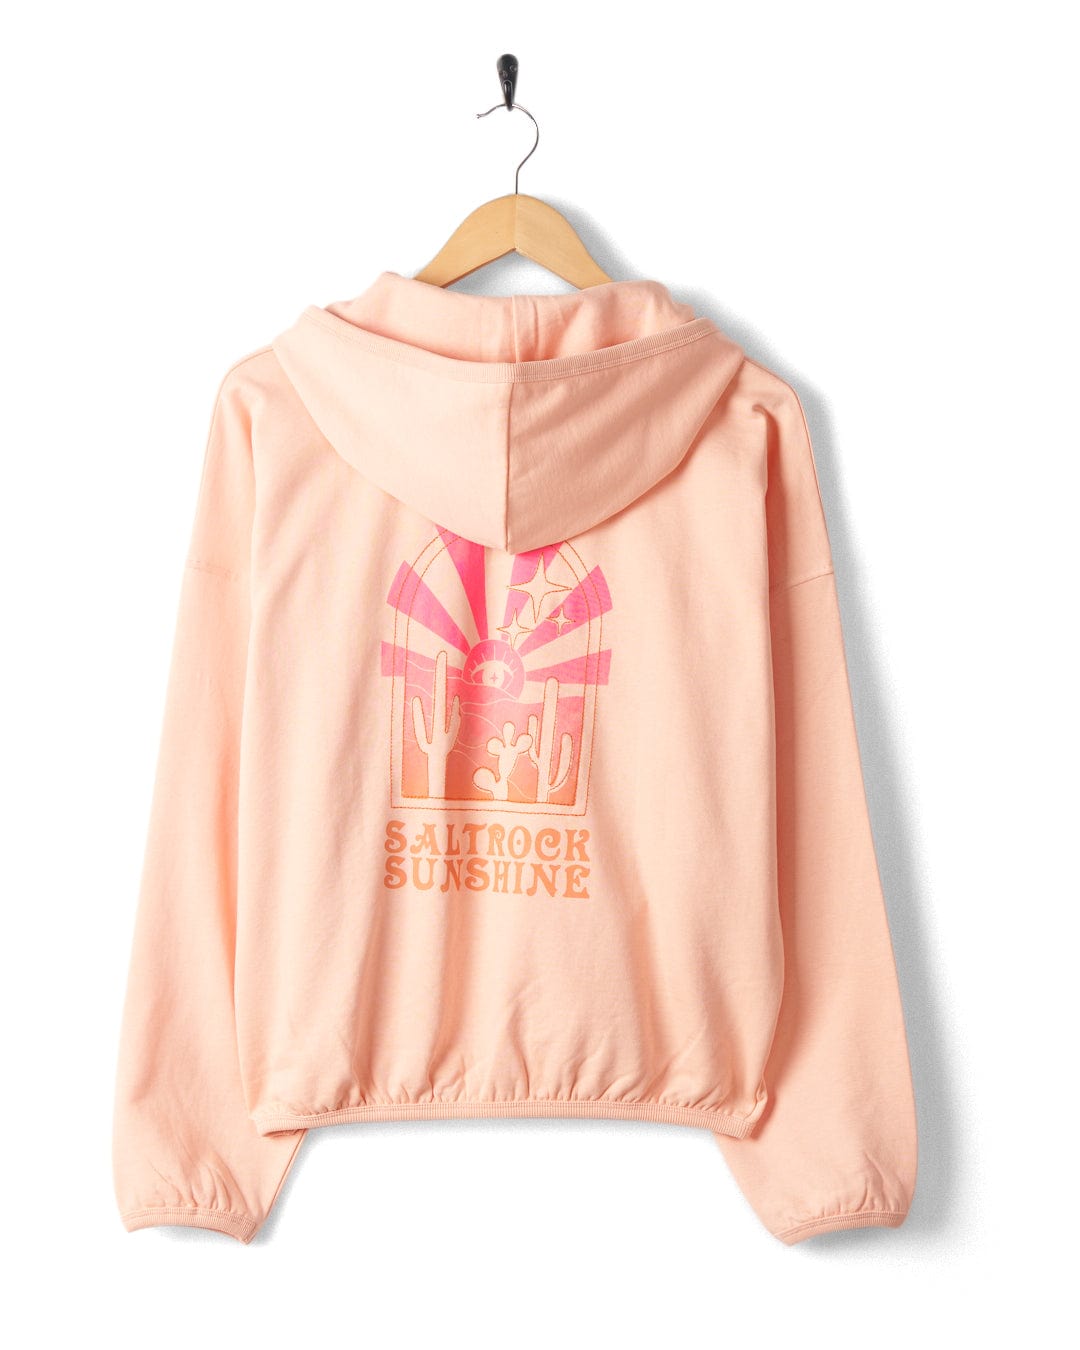 A peach-colored hooded sweatshirt hangs on a wooden hanger, featuring a mystical ombre print of a sunset, surfboards, and cacti with the text "Saltrock Sunshine" embroidered on the back. Made from 100% cotton for ultimate comfort, it is the Saltrock Sunshine - Womens Pop Hood - Peach by Saltrock.